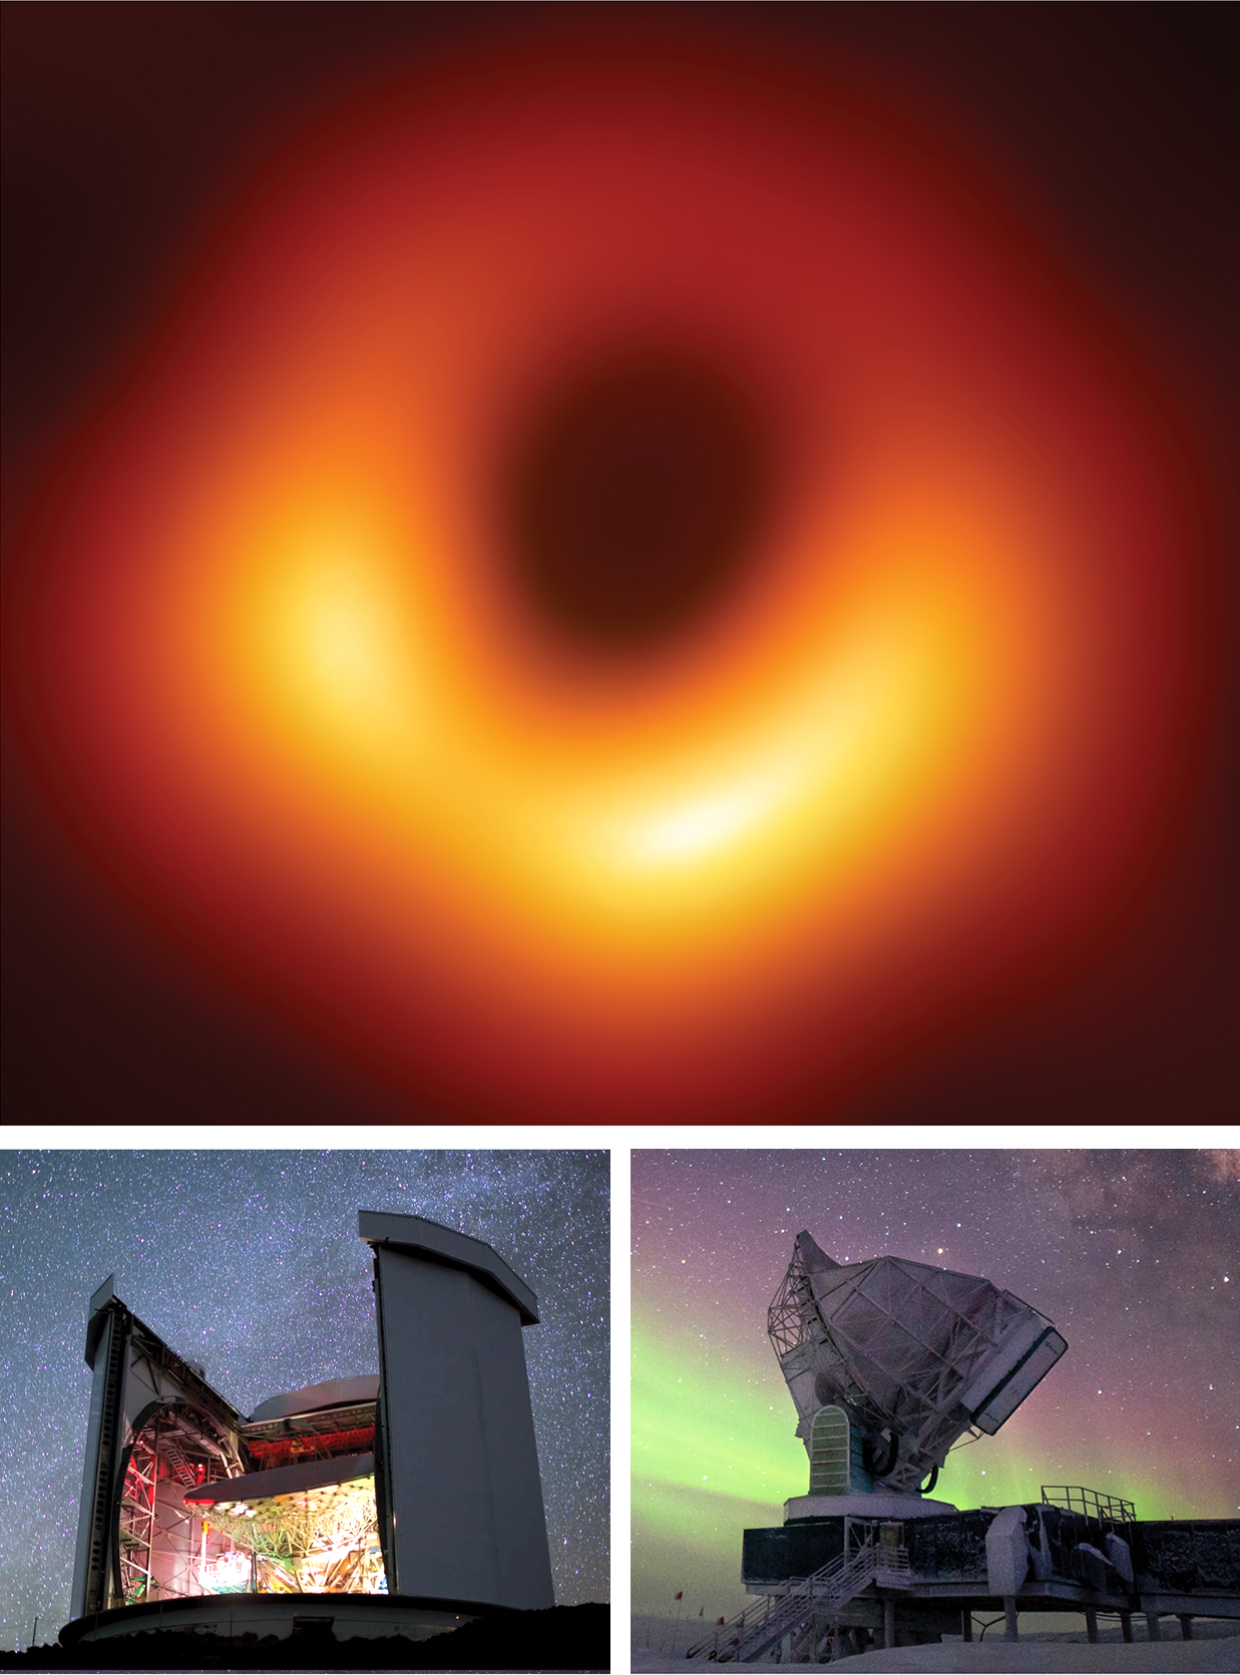 Why Is the First-Ever Black Hole Picture an Orange Ring?